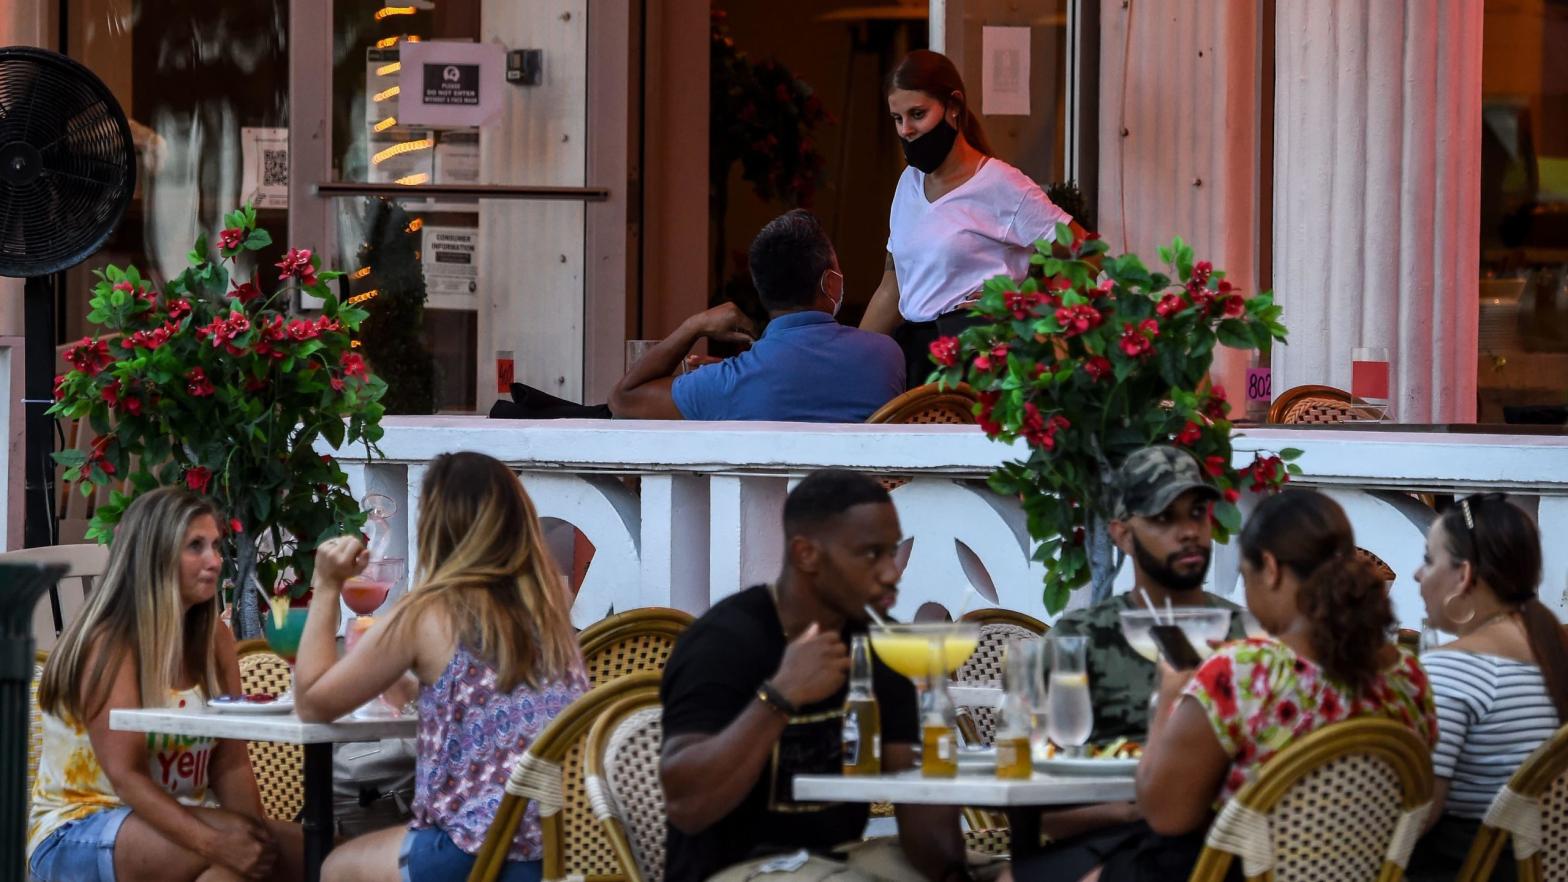 A restaurant on Ocean Drive in Miami Beach, Florida serves customers who apparently have no idea there's a pandemic going on (July 14, 2020). (Photo: Chandan Khanna, Getty Images)